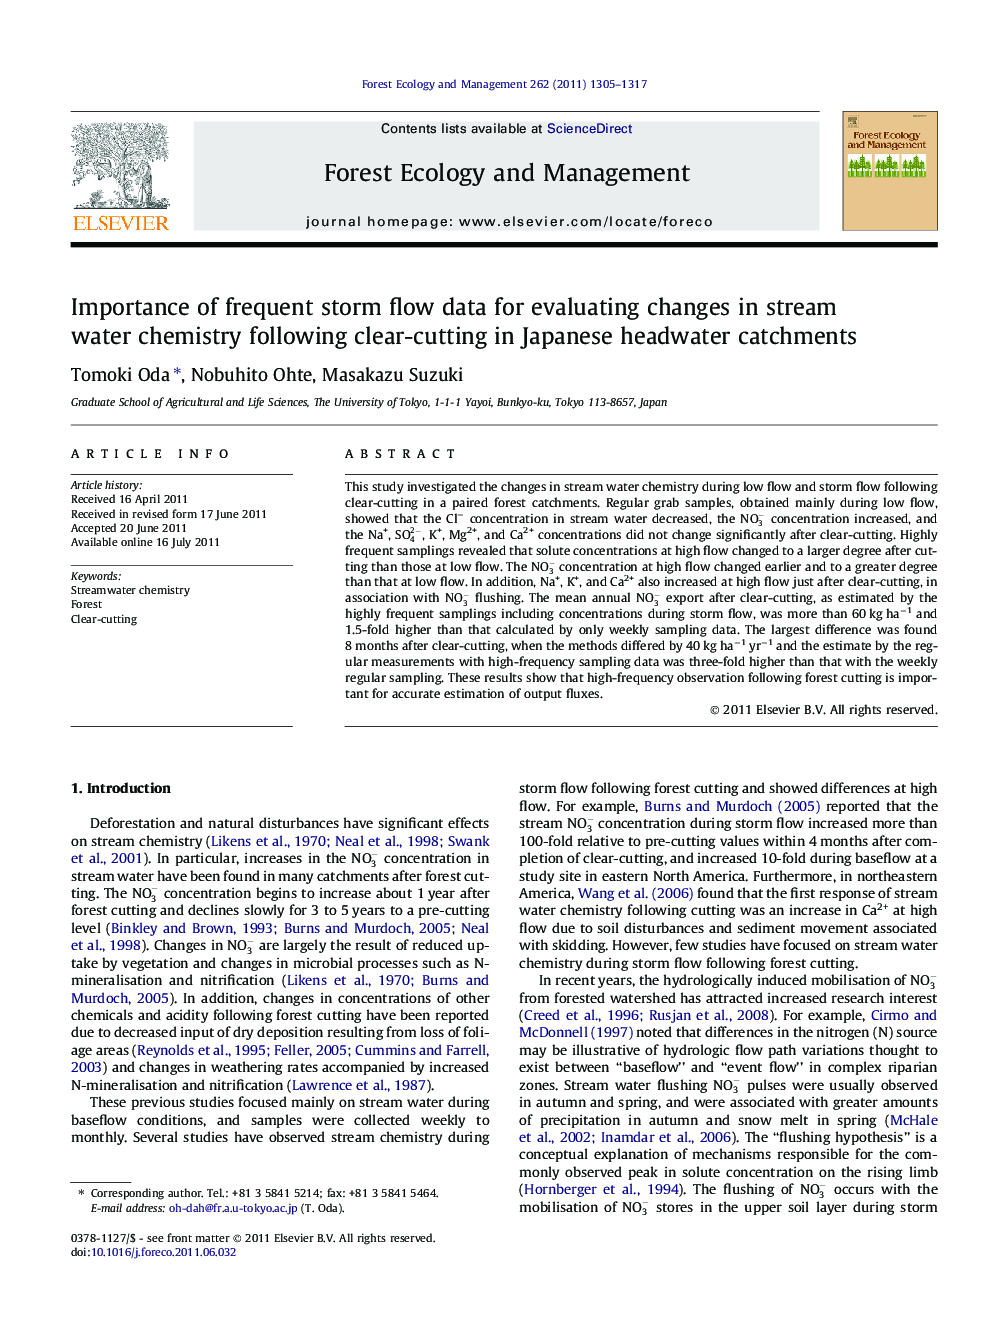 Importance of frequent storm flow data for evaluating changes in stream water chemistry following clear-cutting in Japanese headwater catchments